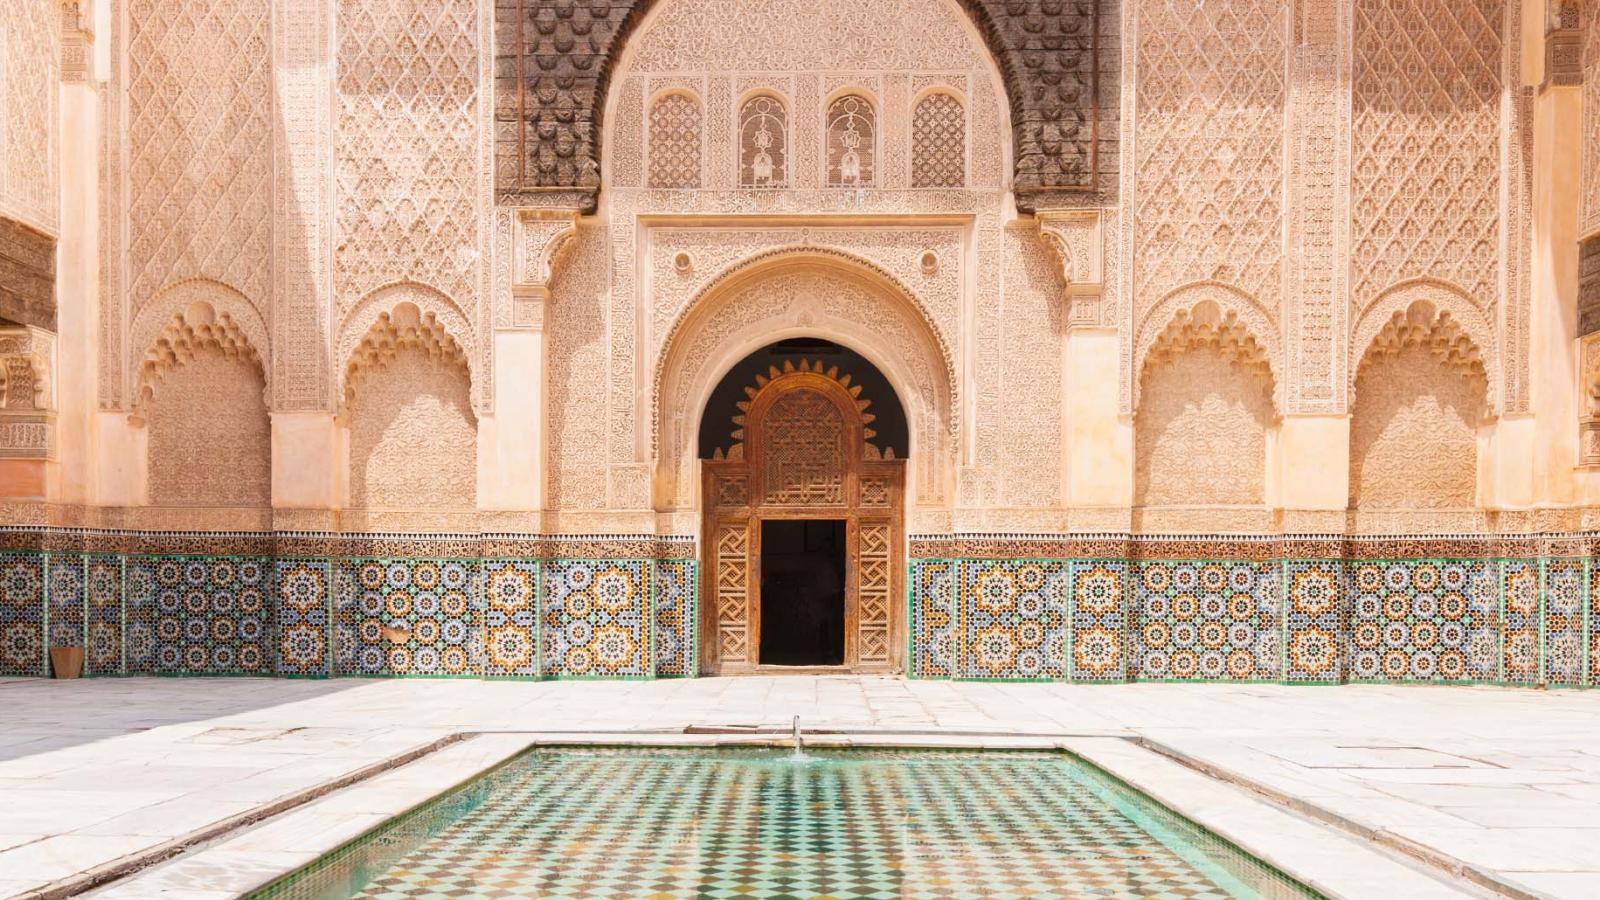 How best to spend 72 hours in Marrakech